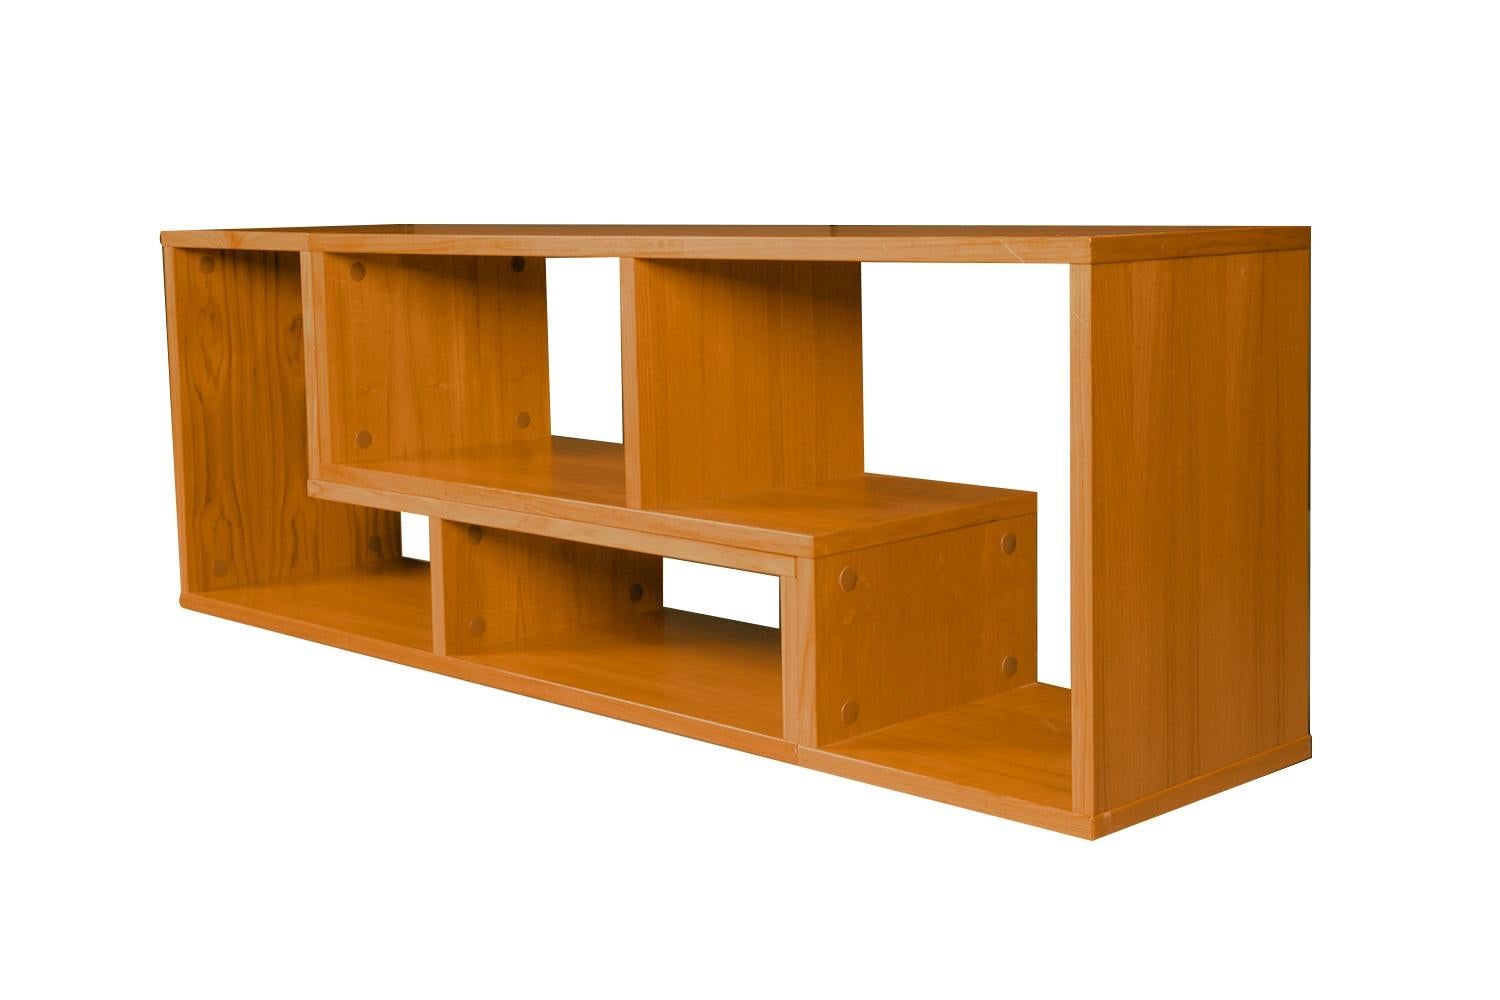 An absolutely beautiful matched pair of nesting free standing, expanding, low, bookcases crafted in nearly pristine condition. Inspired by modern design having retro and contemporary appeal. Each of L-shaped form and made to interlock and rest on